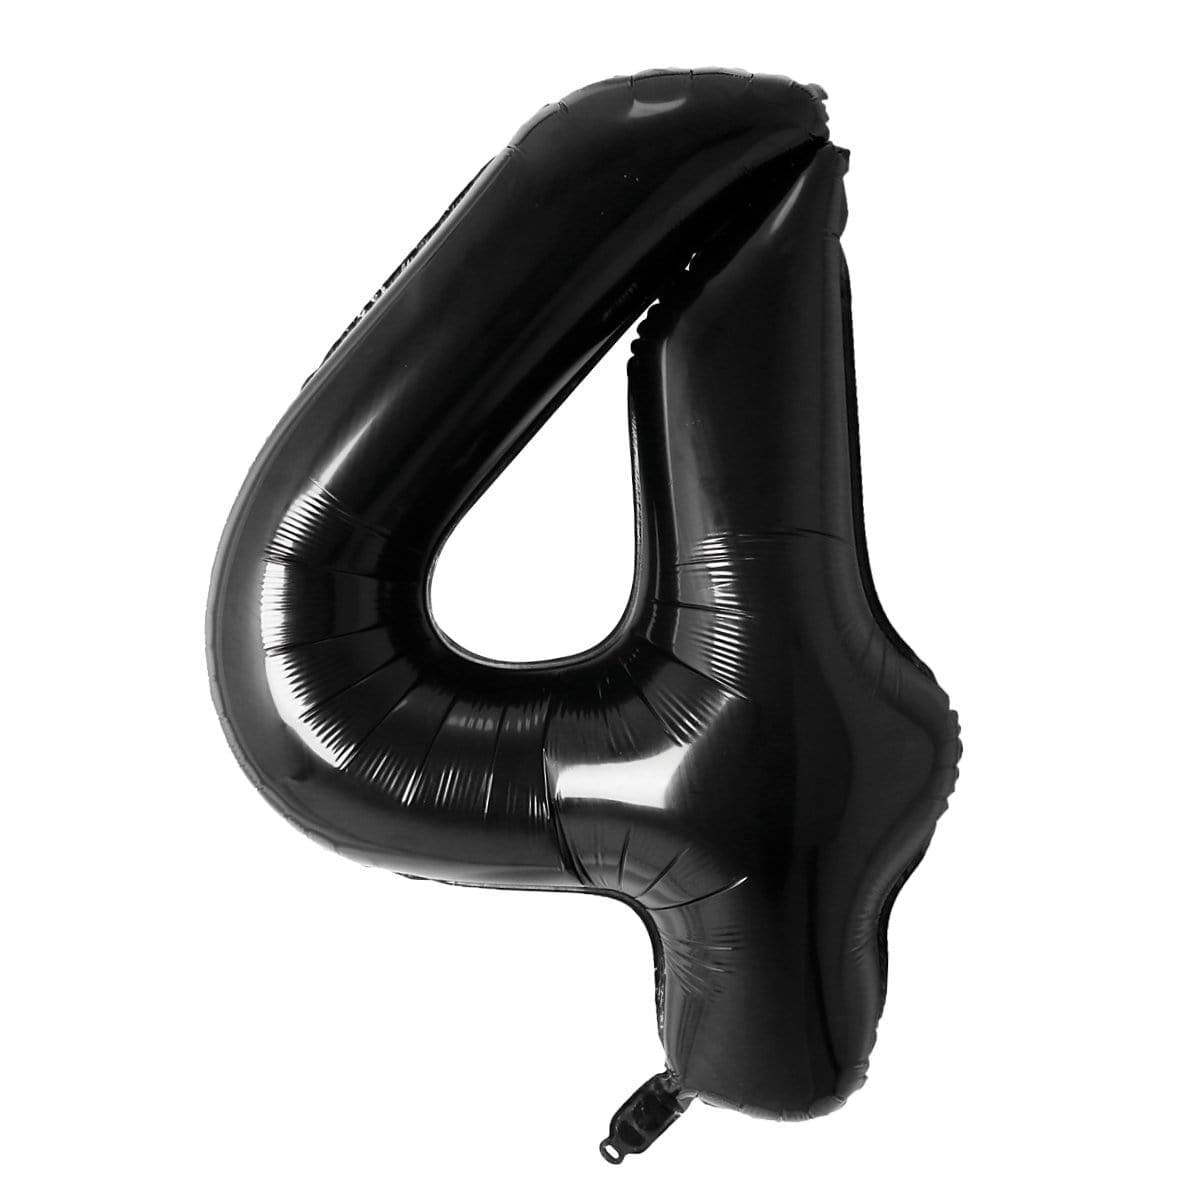 Buy Balloons Black Number 4 Foil Balloon, 34 Inches sold at Party Expert